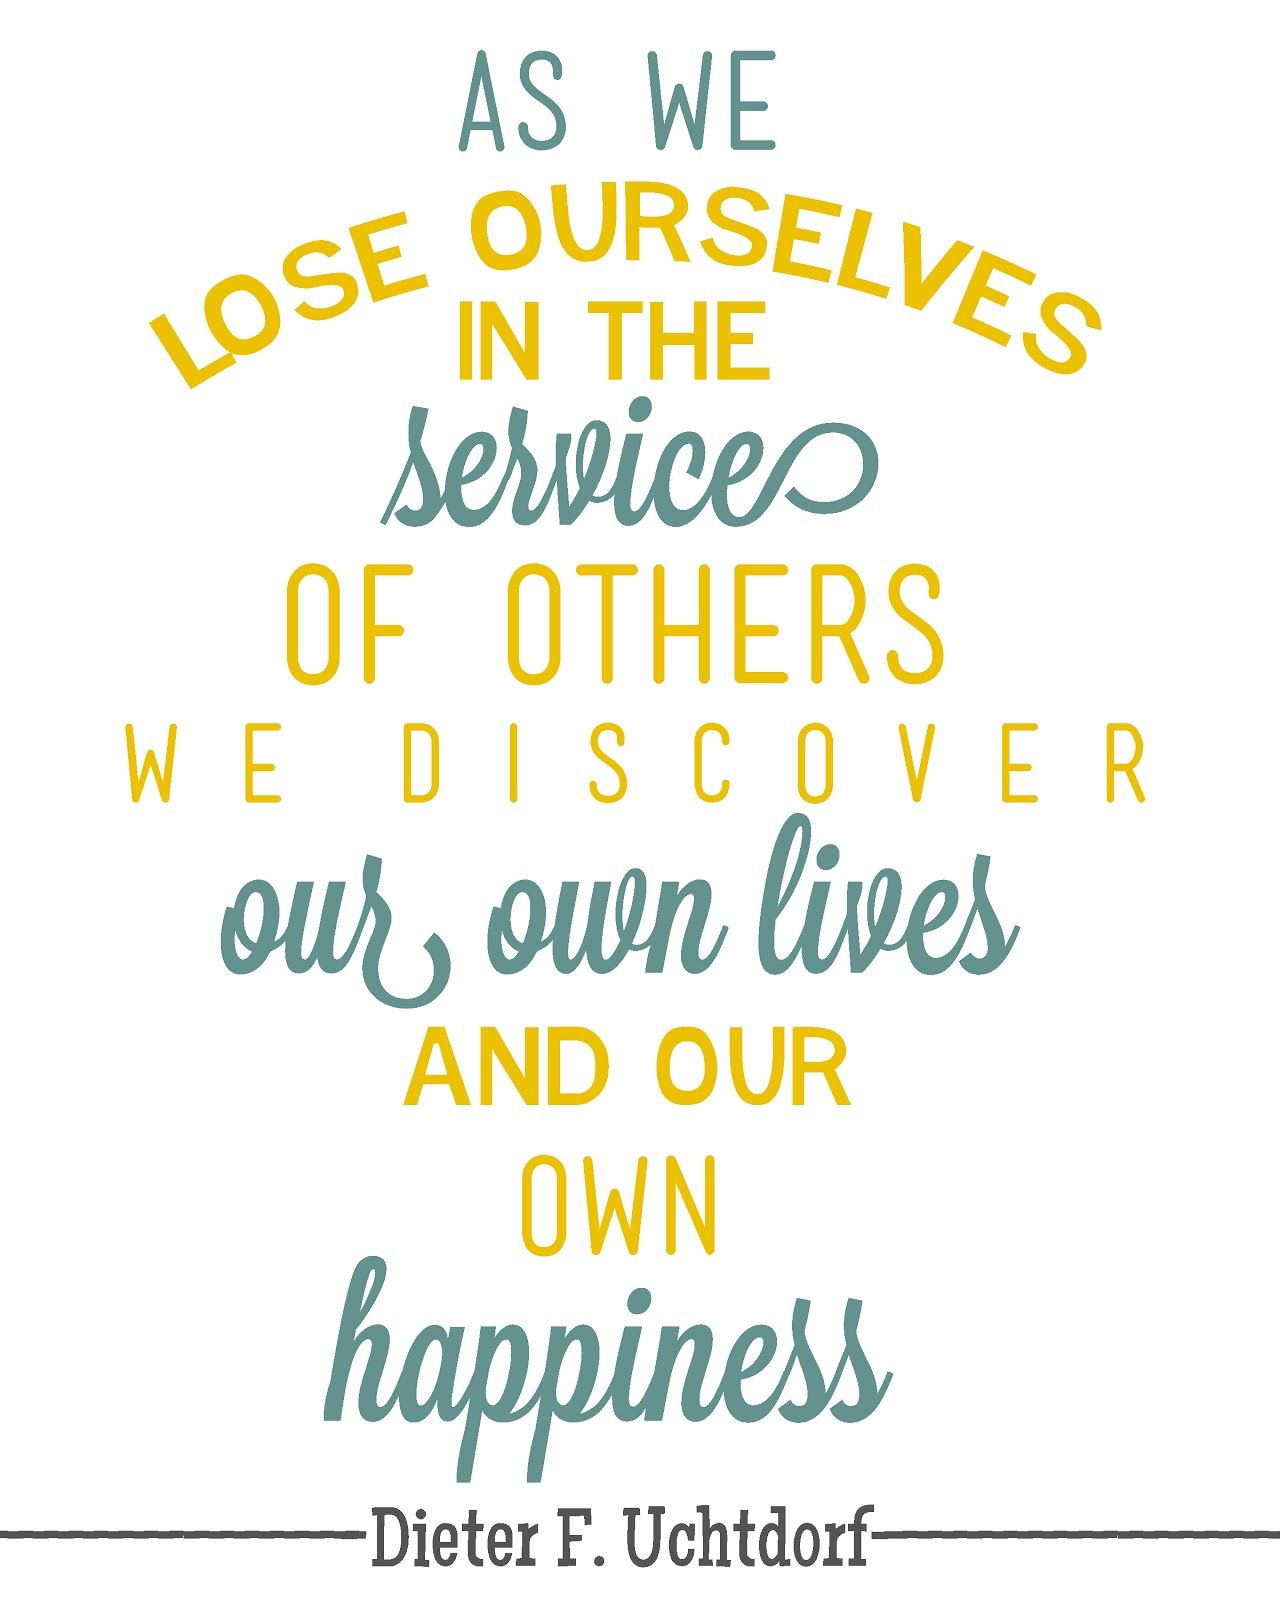 As we lose ourselves in the service of others we discover our lives and our own happiness. Dieter F. Uchtdorf